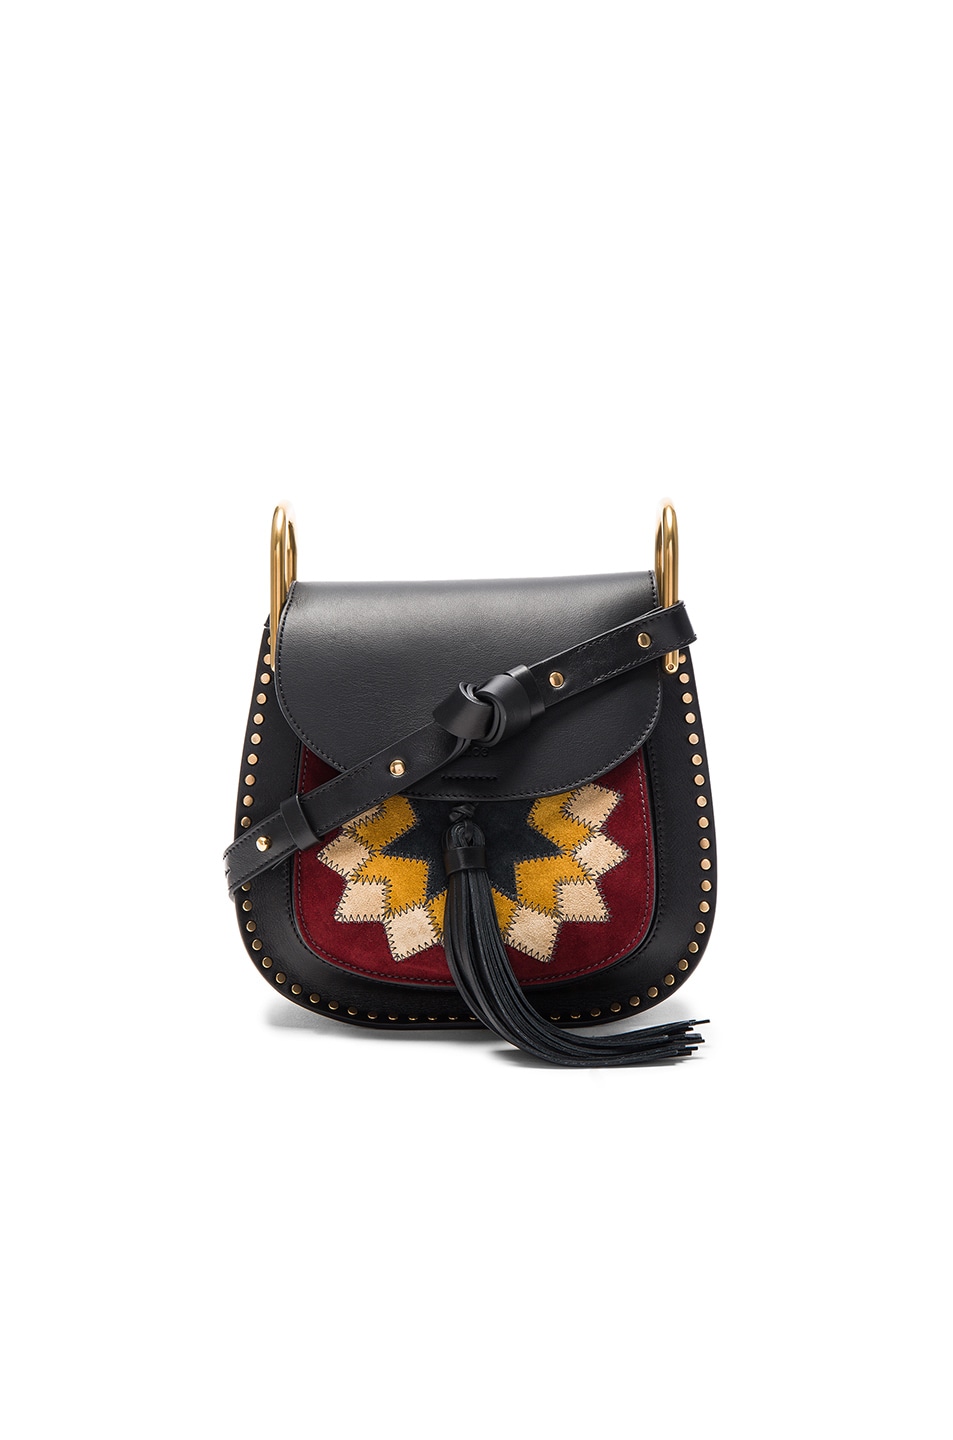 Image 1 of Chloe Small Suede Patchwork Hudson Bag in Black